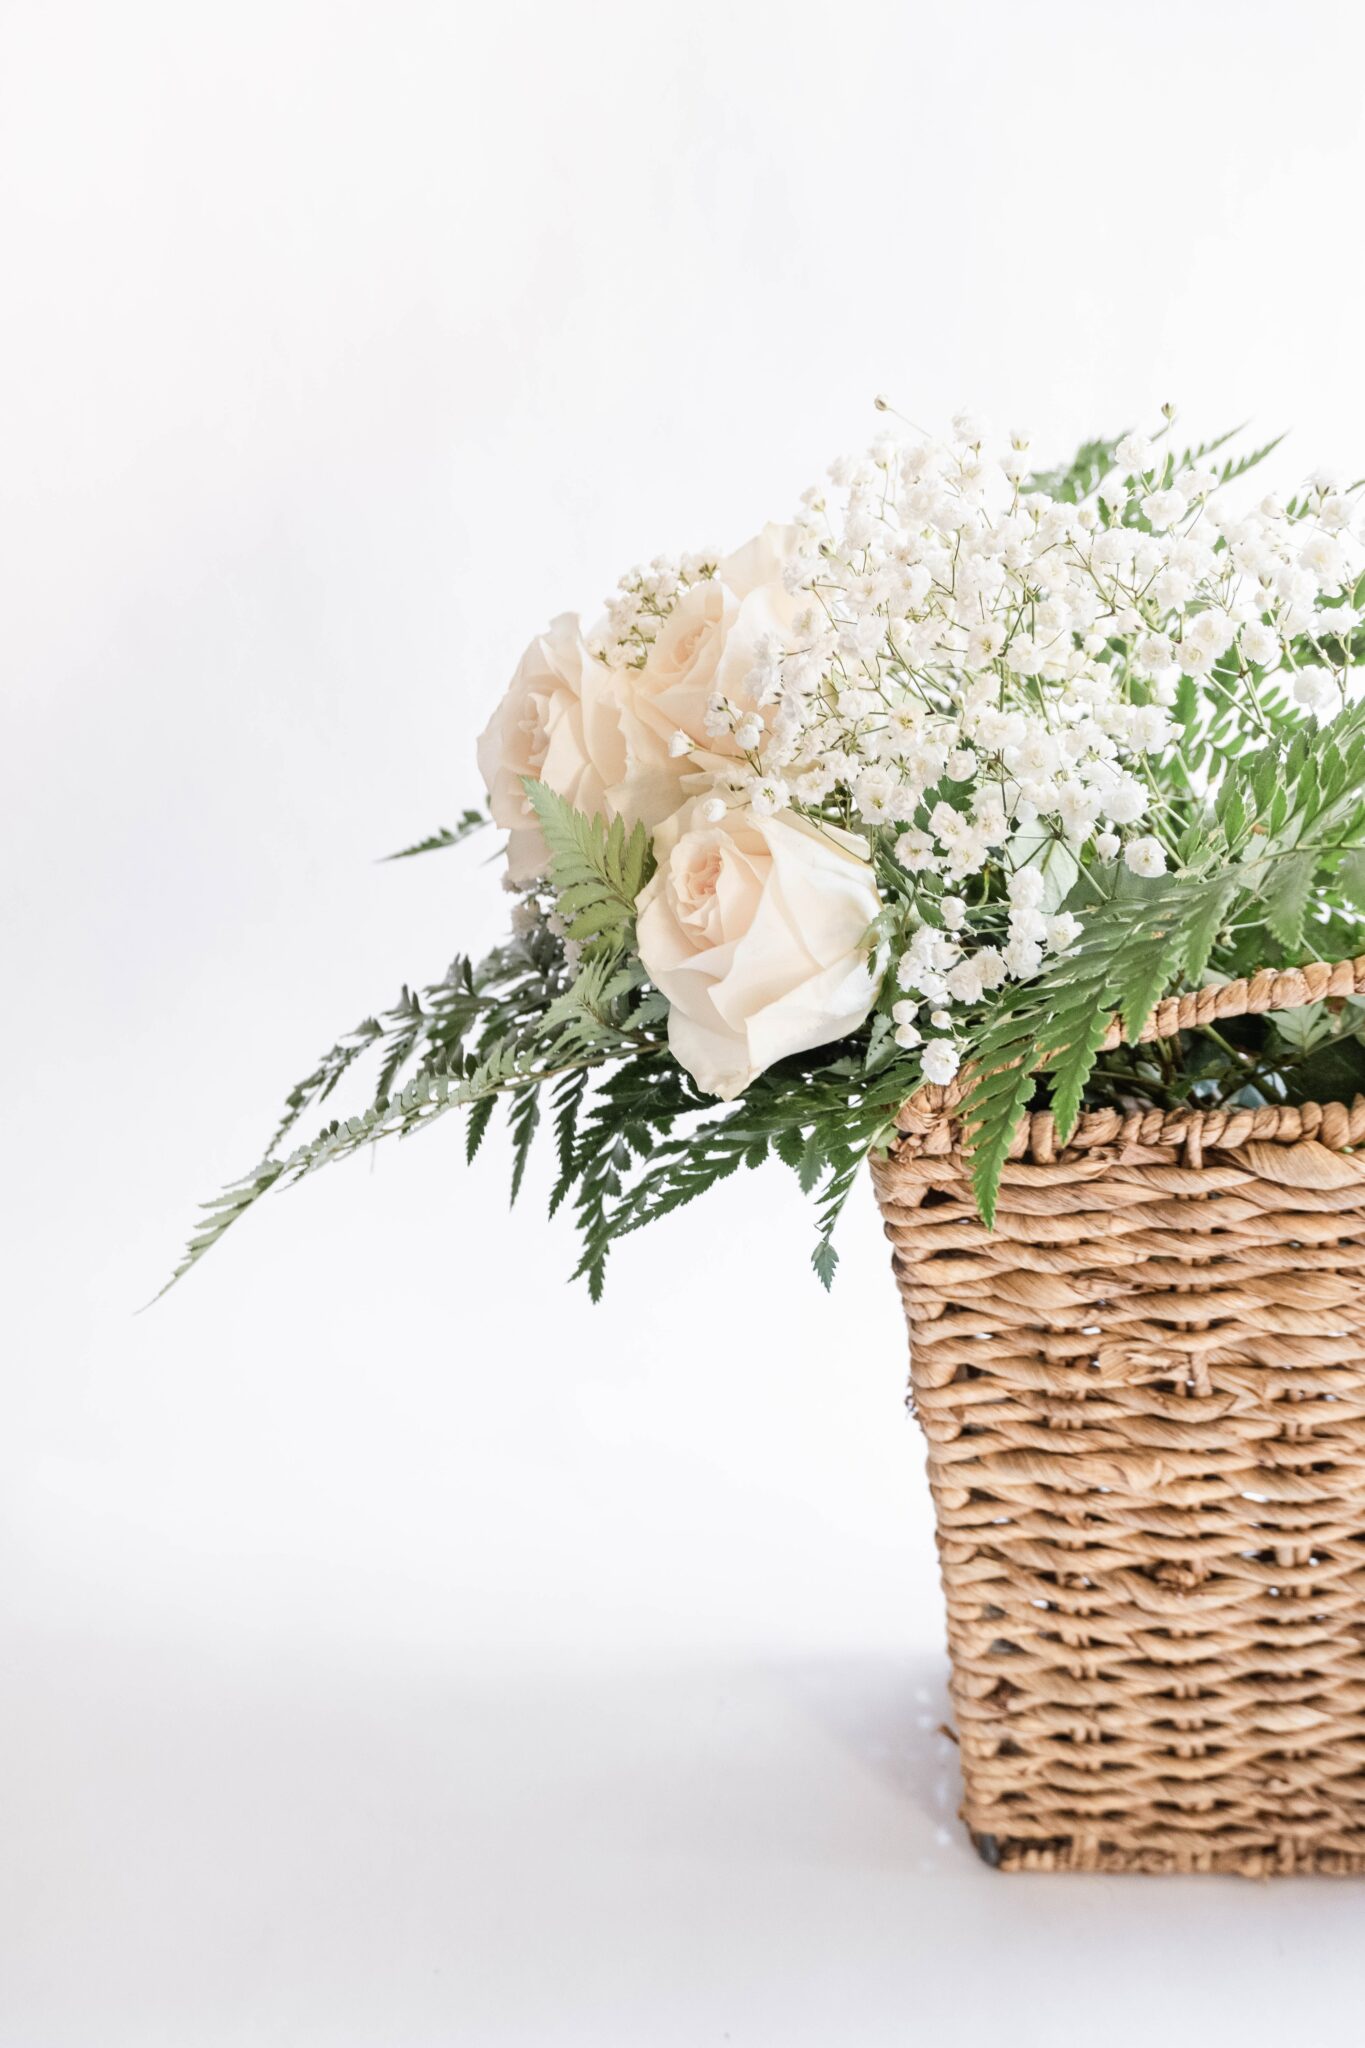 5 Reasons You Should Give Flowers as a Gift